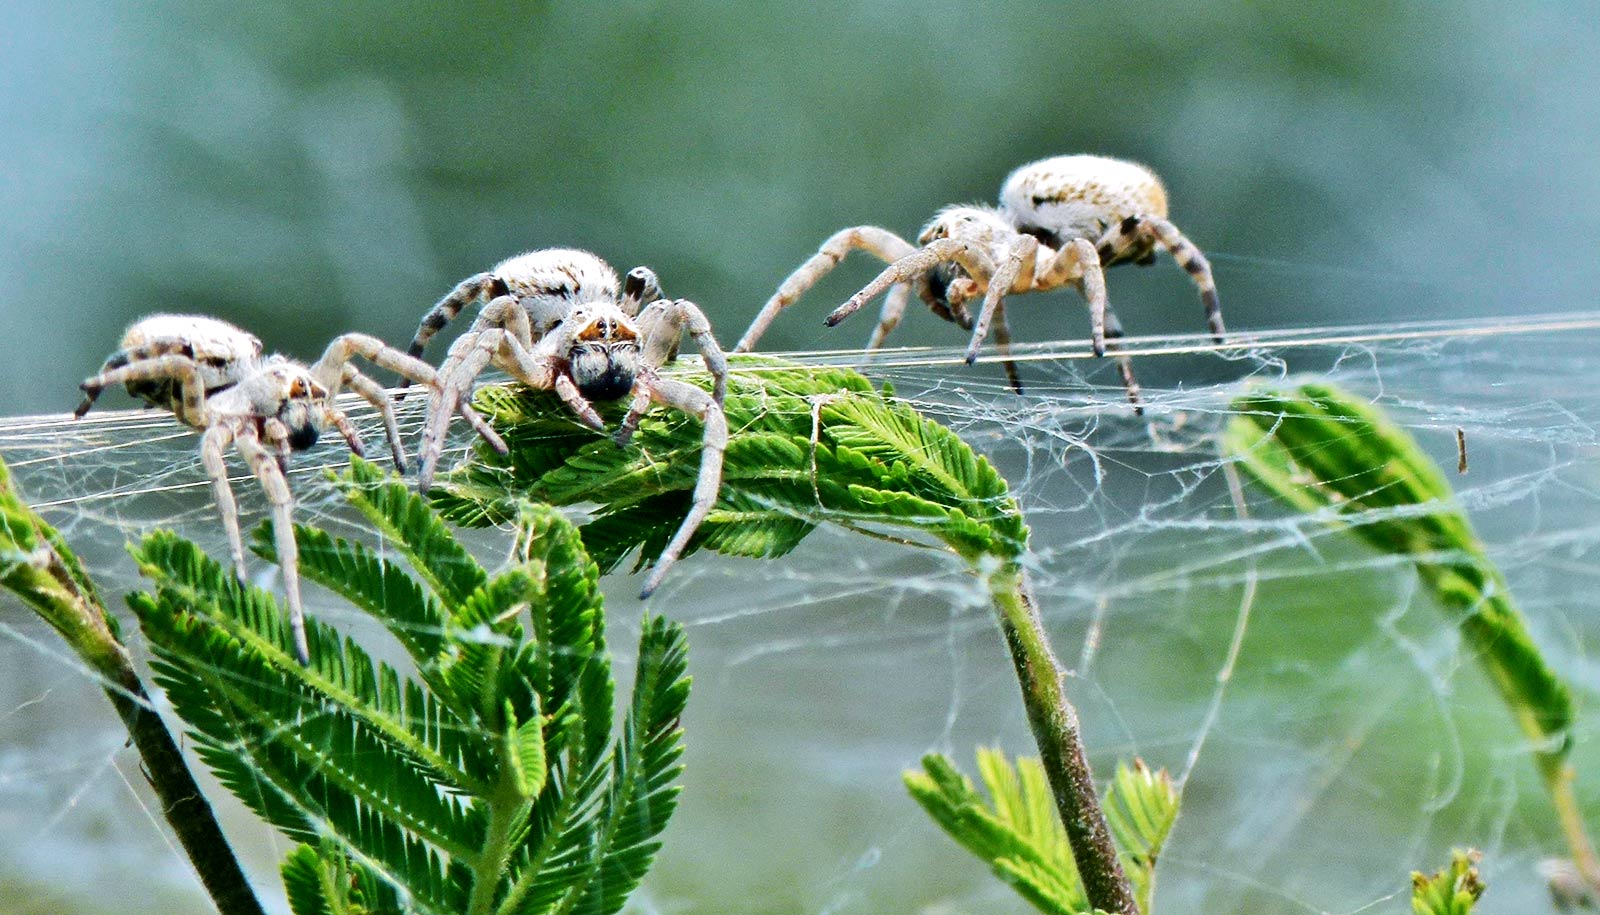 A picture of social spiders to better answer "Do Spiders Have Families?"